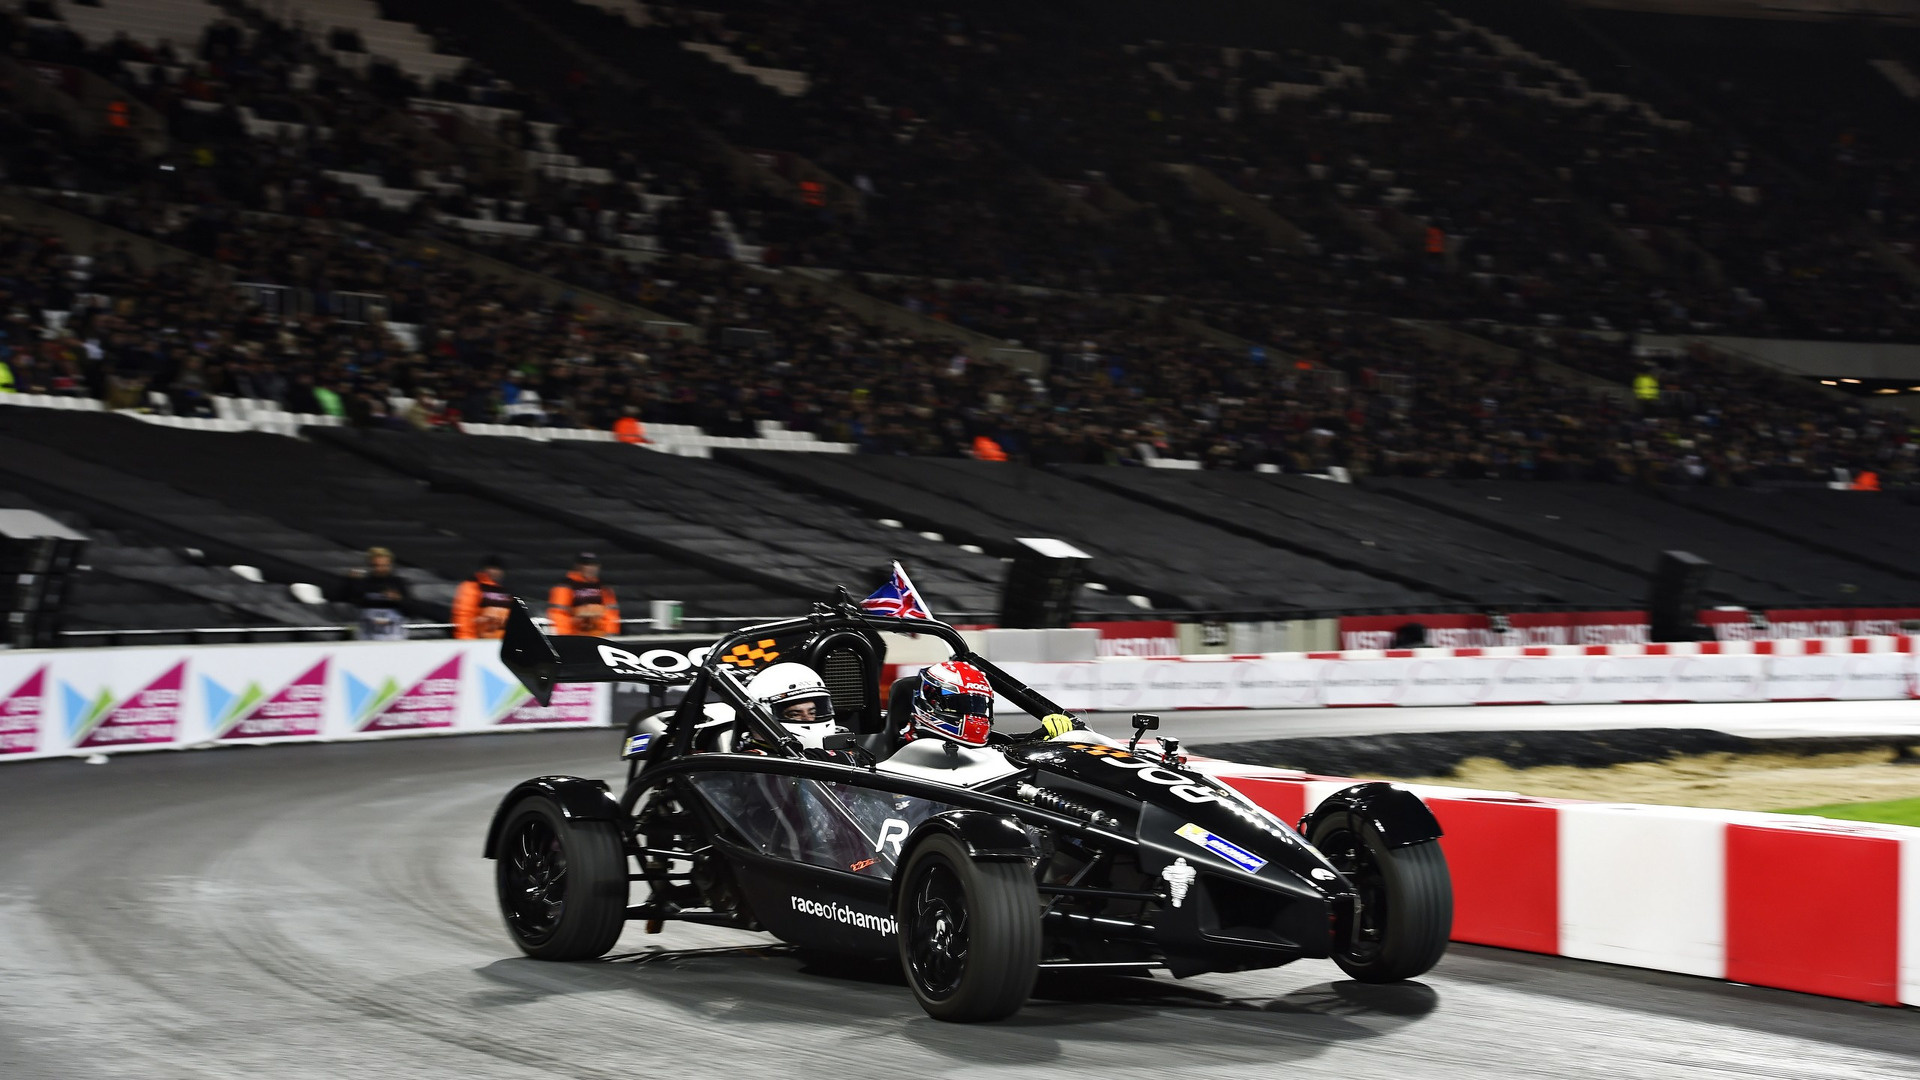 Race of Champions (ROC): London Stadium, Stratford, The ROC Nations Cup, Team England 1. 1920x1080 Full HD Background.